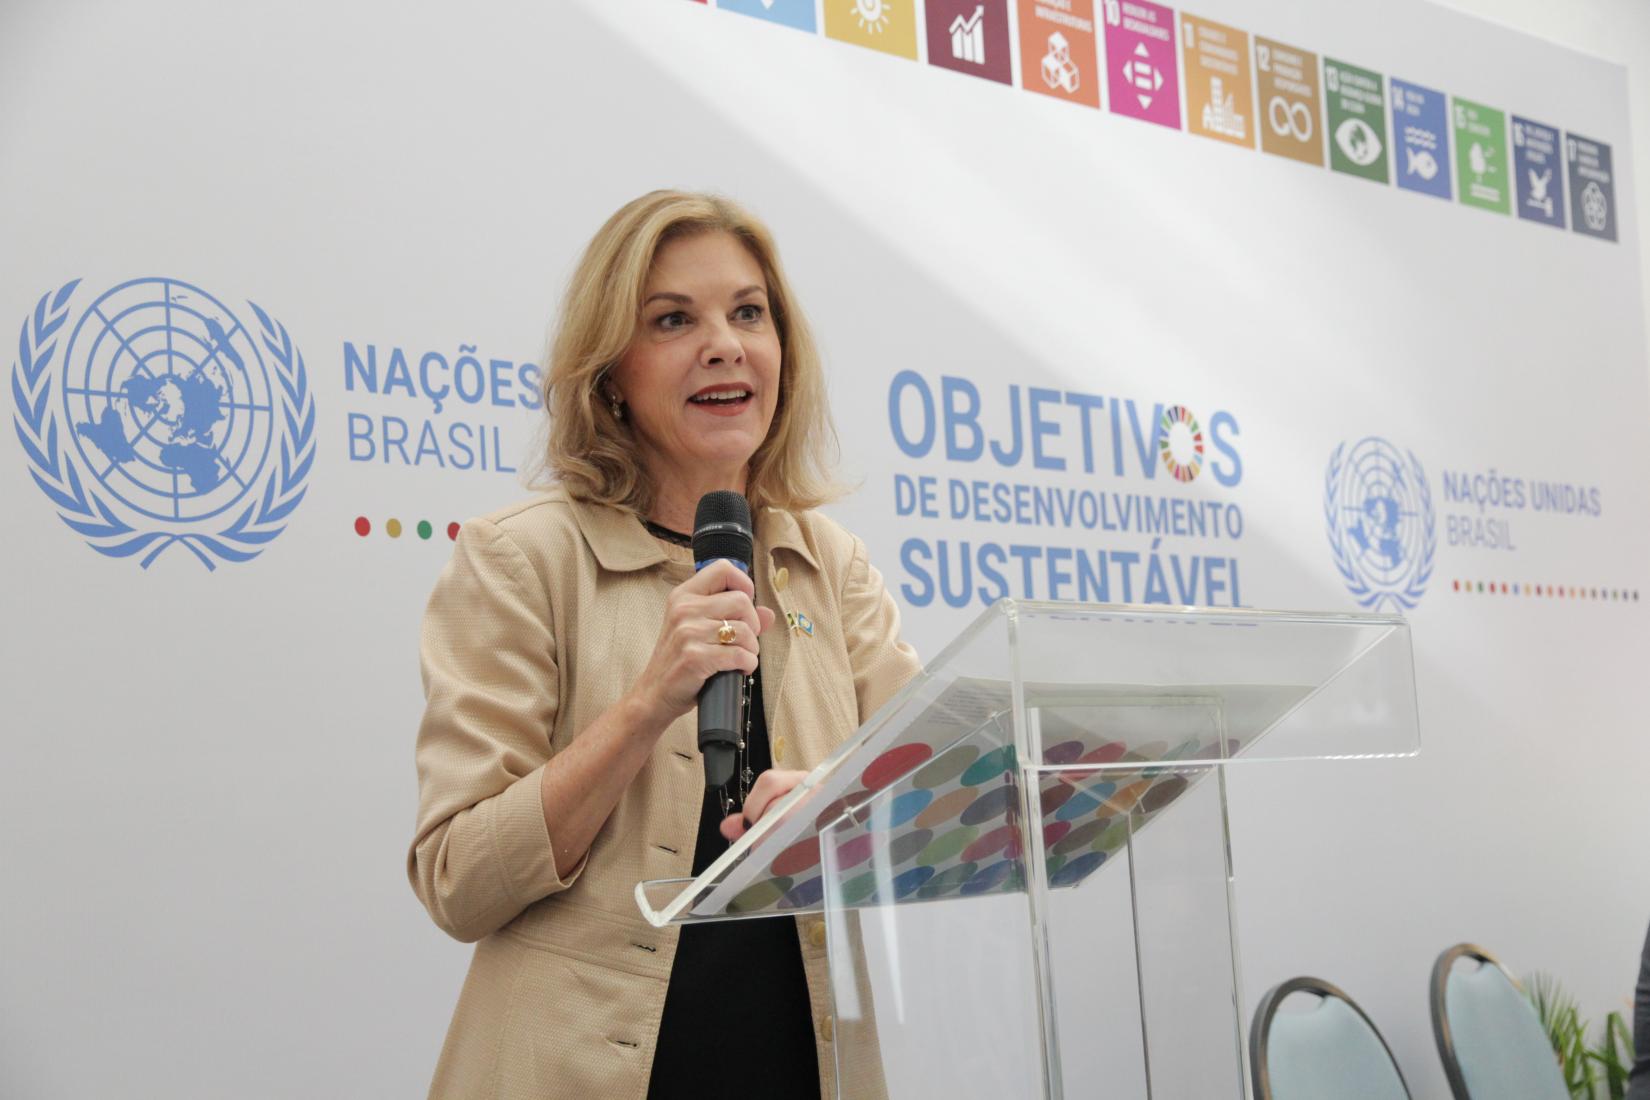 The UN Resident Coordinator in Brazil, Silvia Rucks, speaks during the launch of the new shared services center in Brasilia.